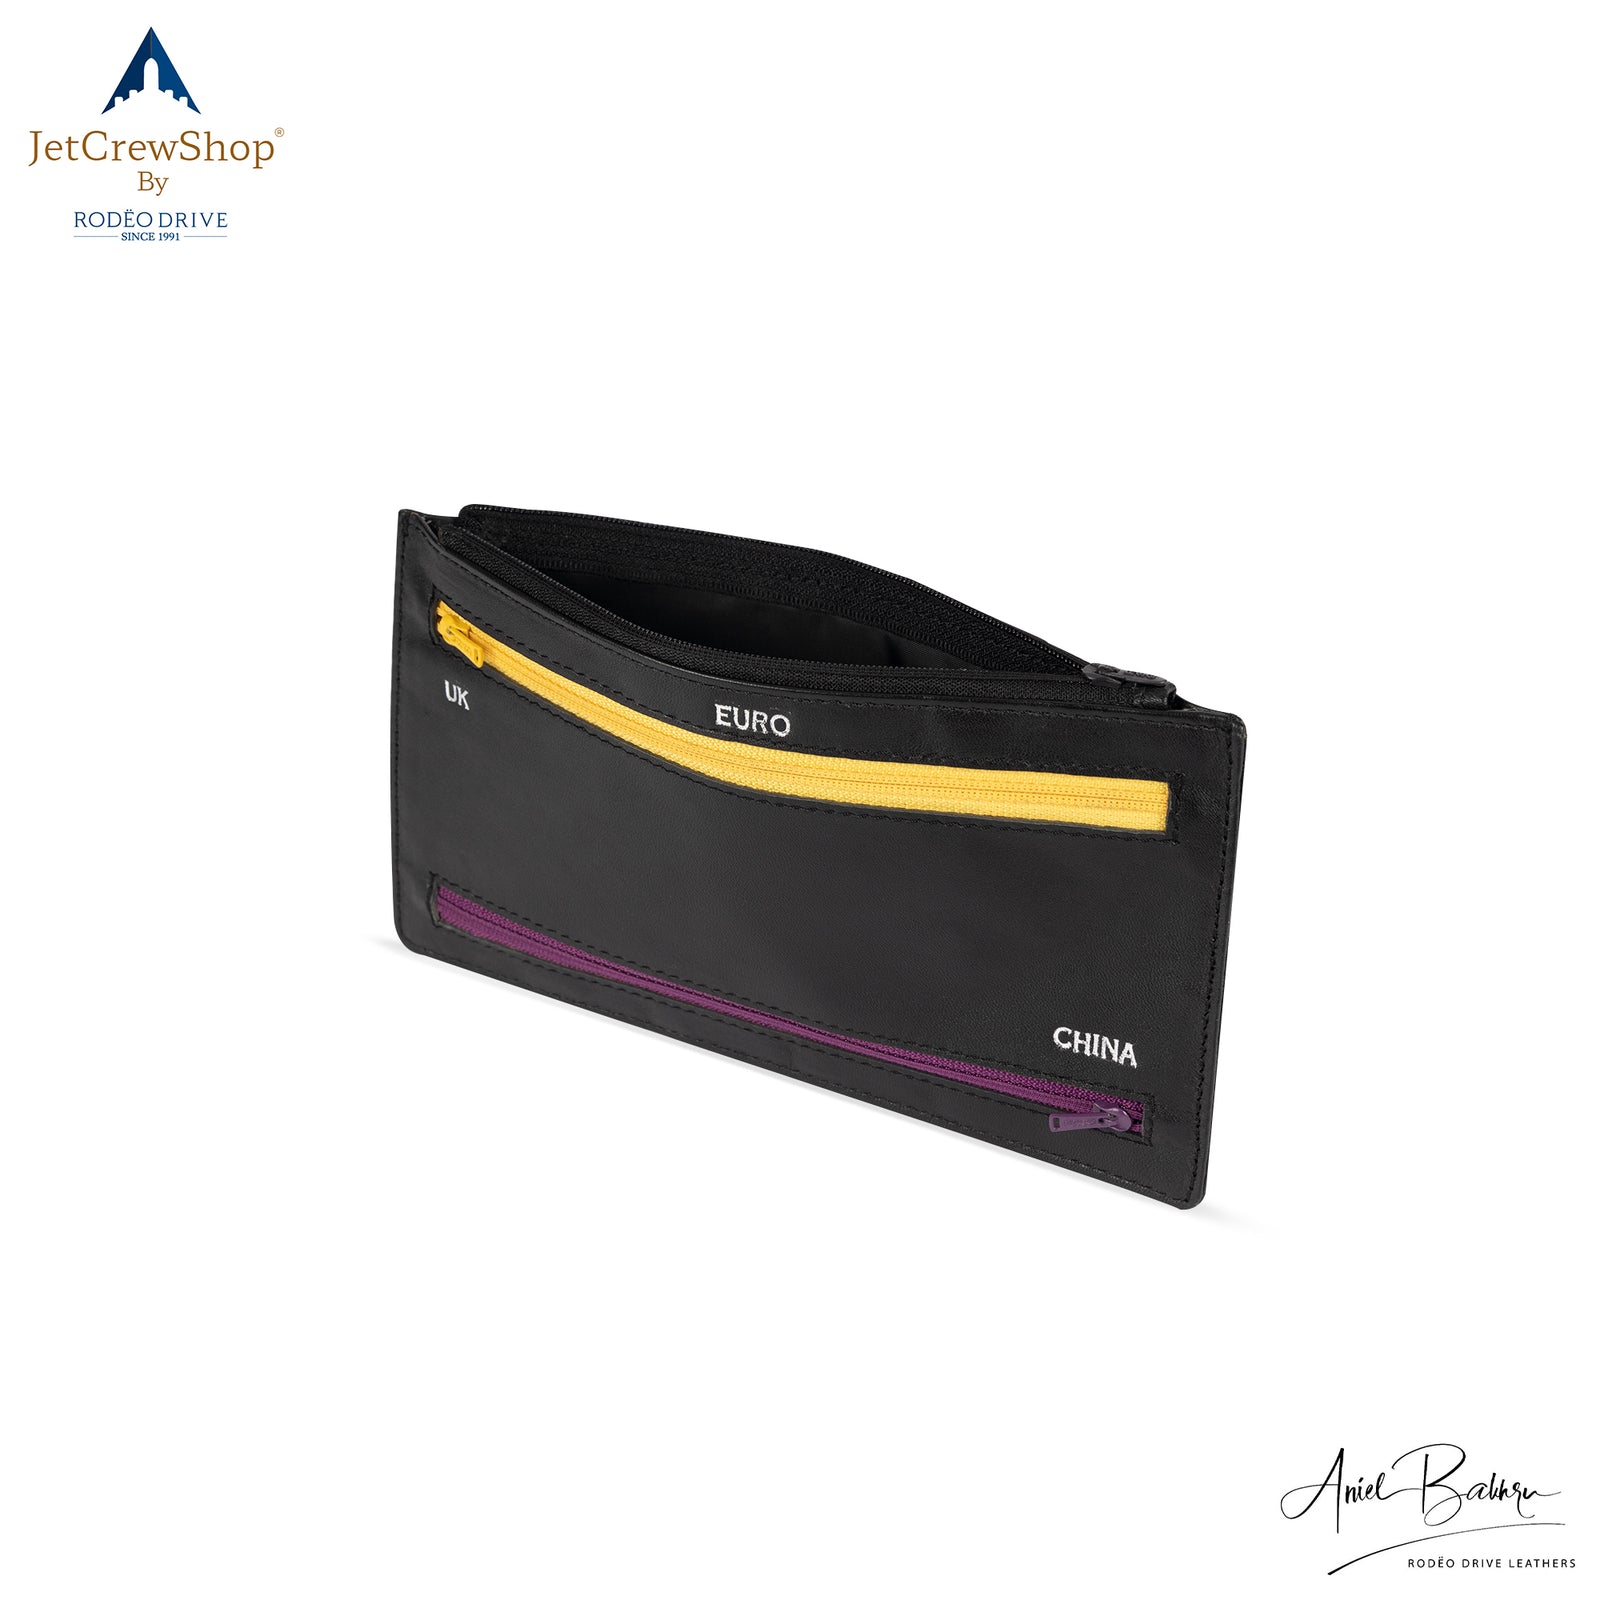 Side image of 5 Zip Multi currency Wallet. Top Zip, black in color is open. Zip in front is yellow in color and meant to keep Euro currency. Bottom Zip is purple in color and meant to keep Chinese currency. Purse is ultra slim and handy.